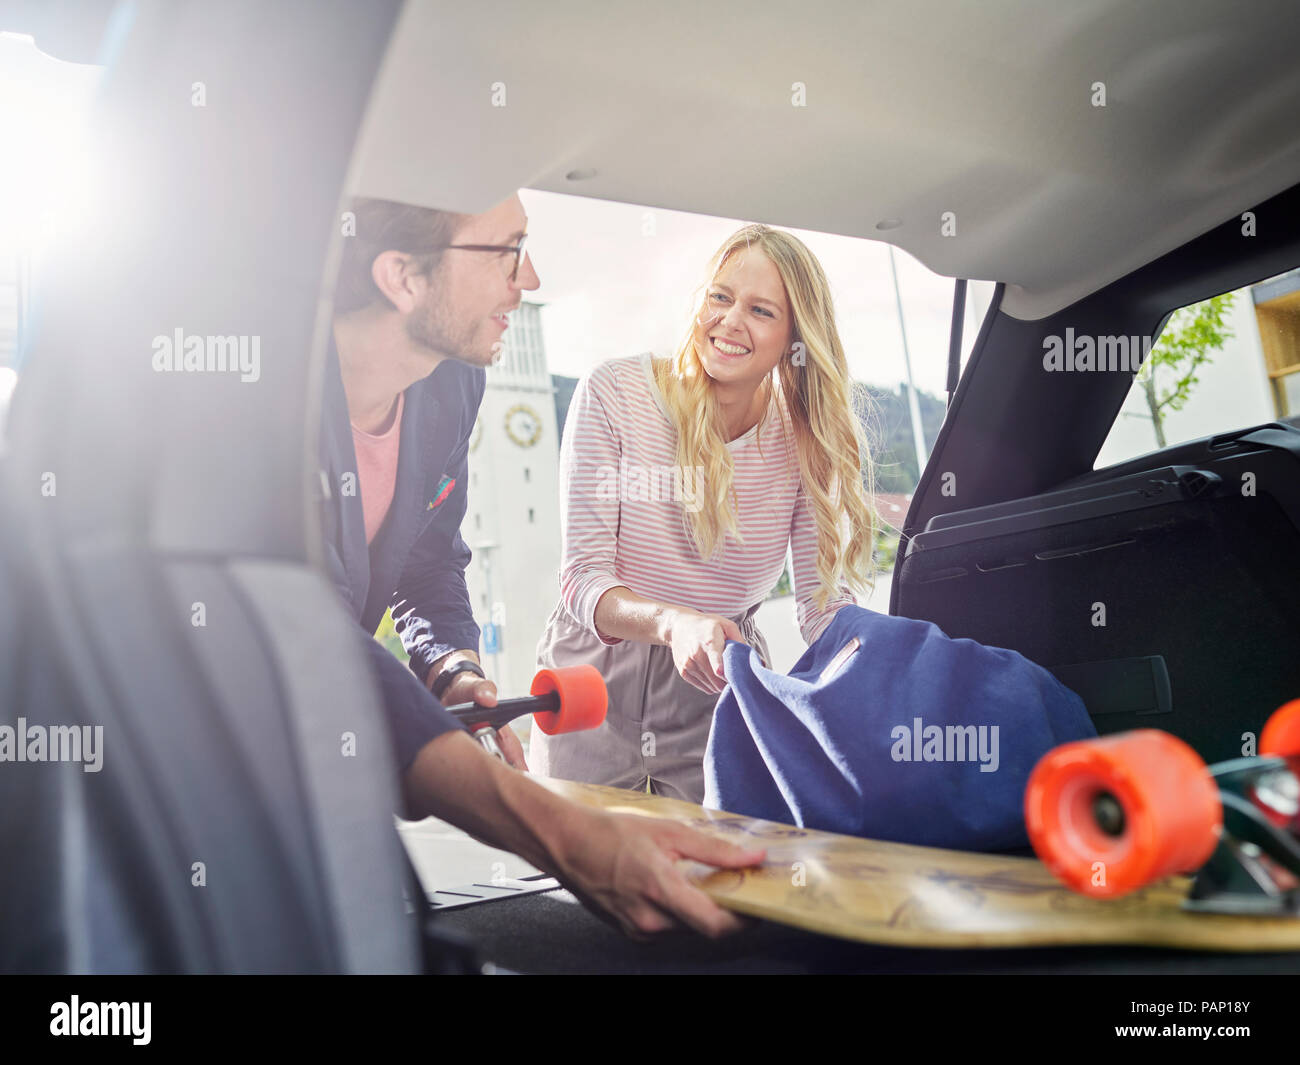 Smiling couple loading boot of electric car Stock Photo